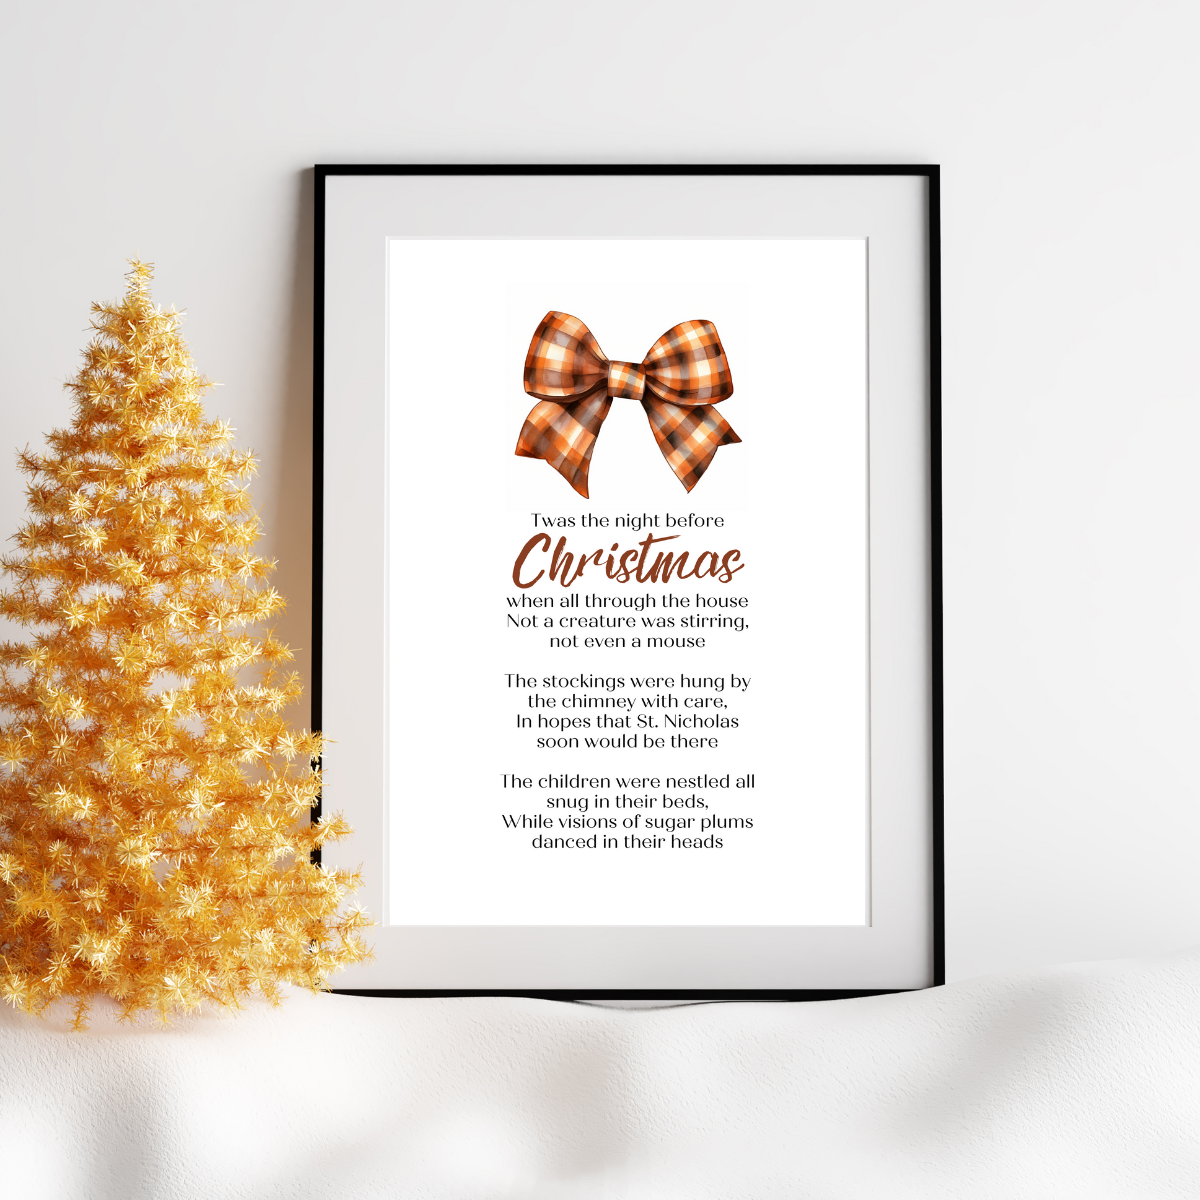 Twas the Night Before Christmas Printable Poster poem in black frame next to pretty festive tree for Christmas home Decor in retro Brown Orange Gingham Bow Design